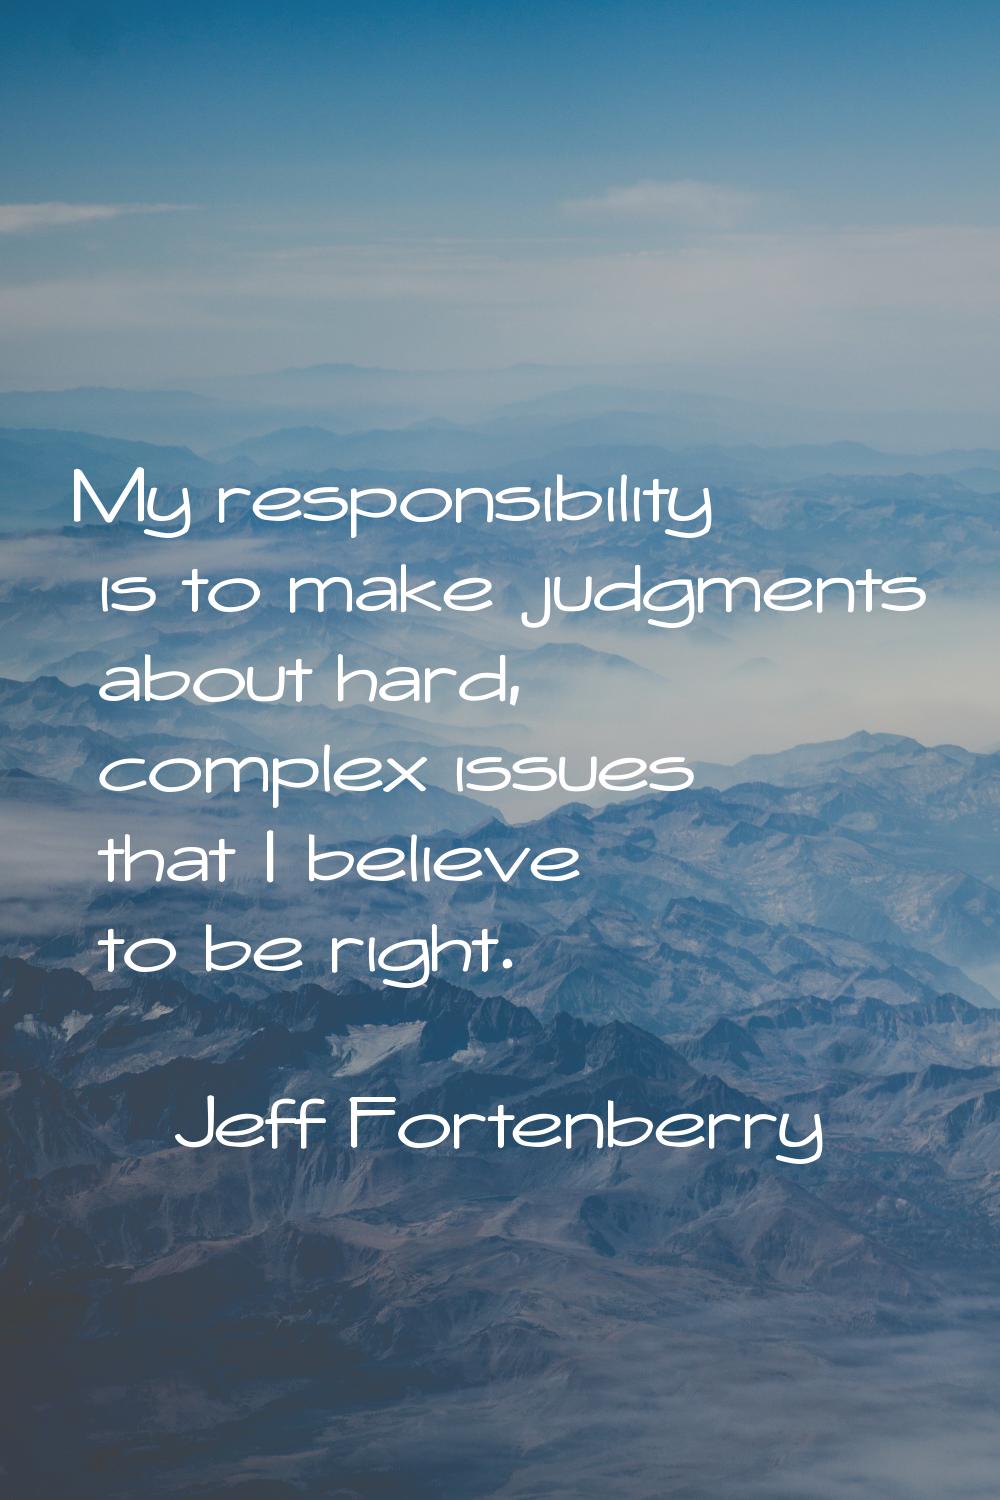 My responsibility is to make judgments about hard, complex issues that I believe to be right.